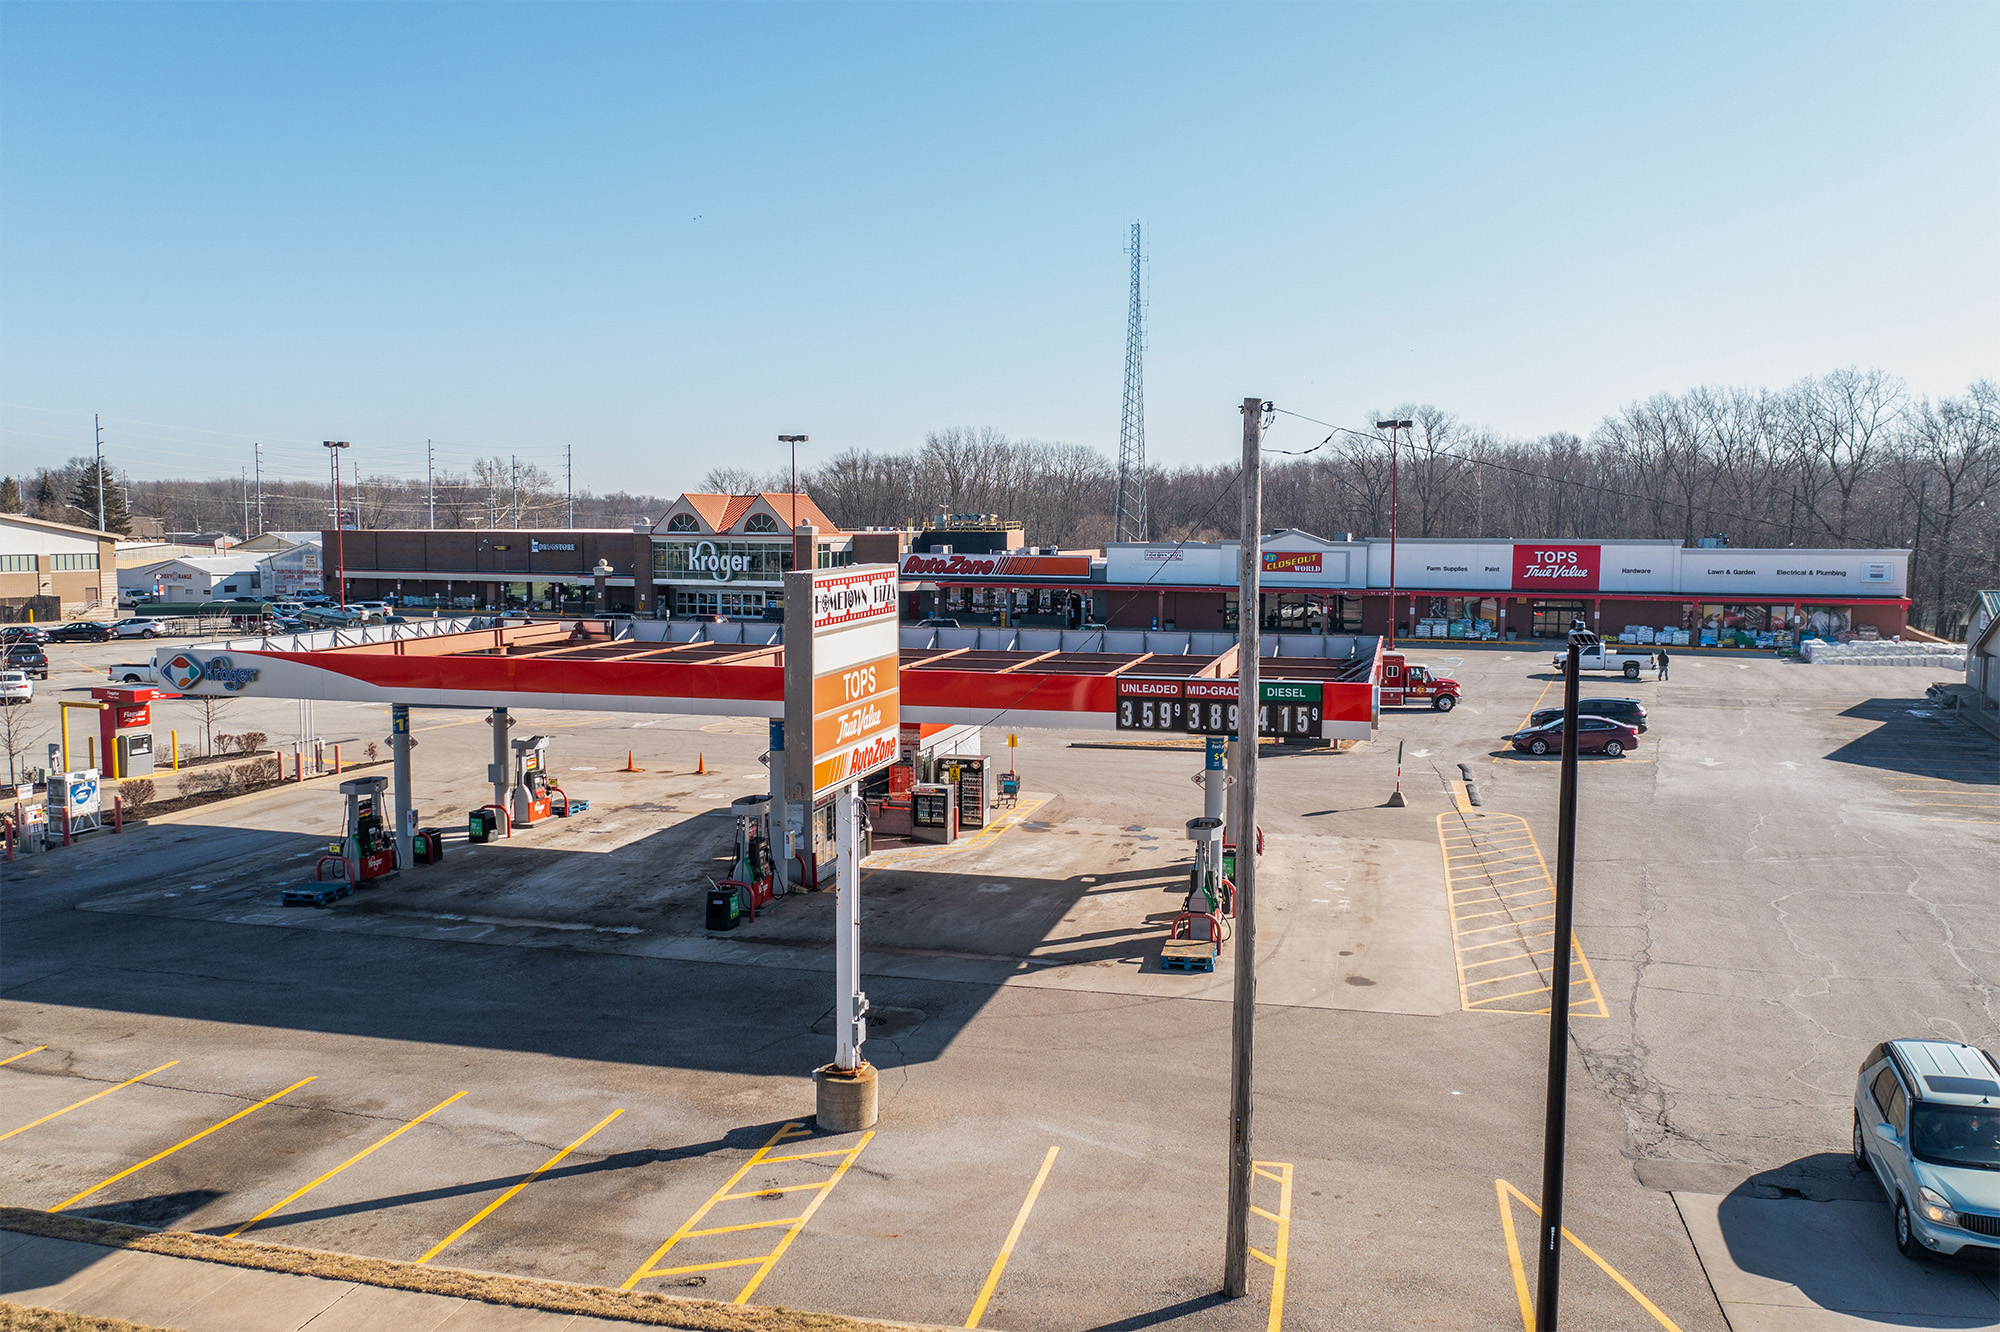 Wide view of Rushville plaza Kroger gas station with plaza in the background.